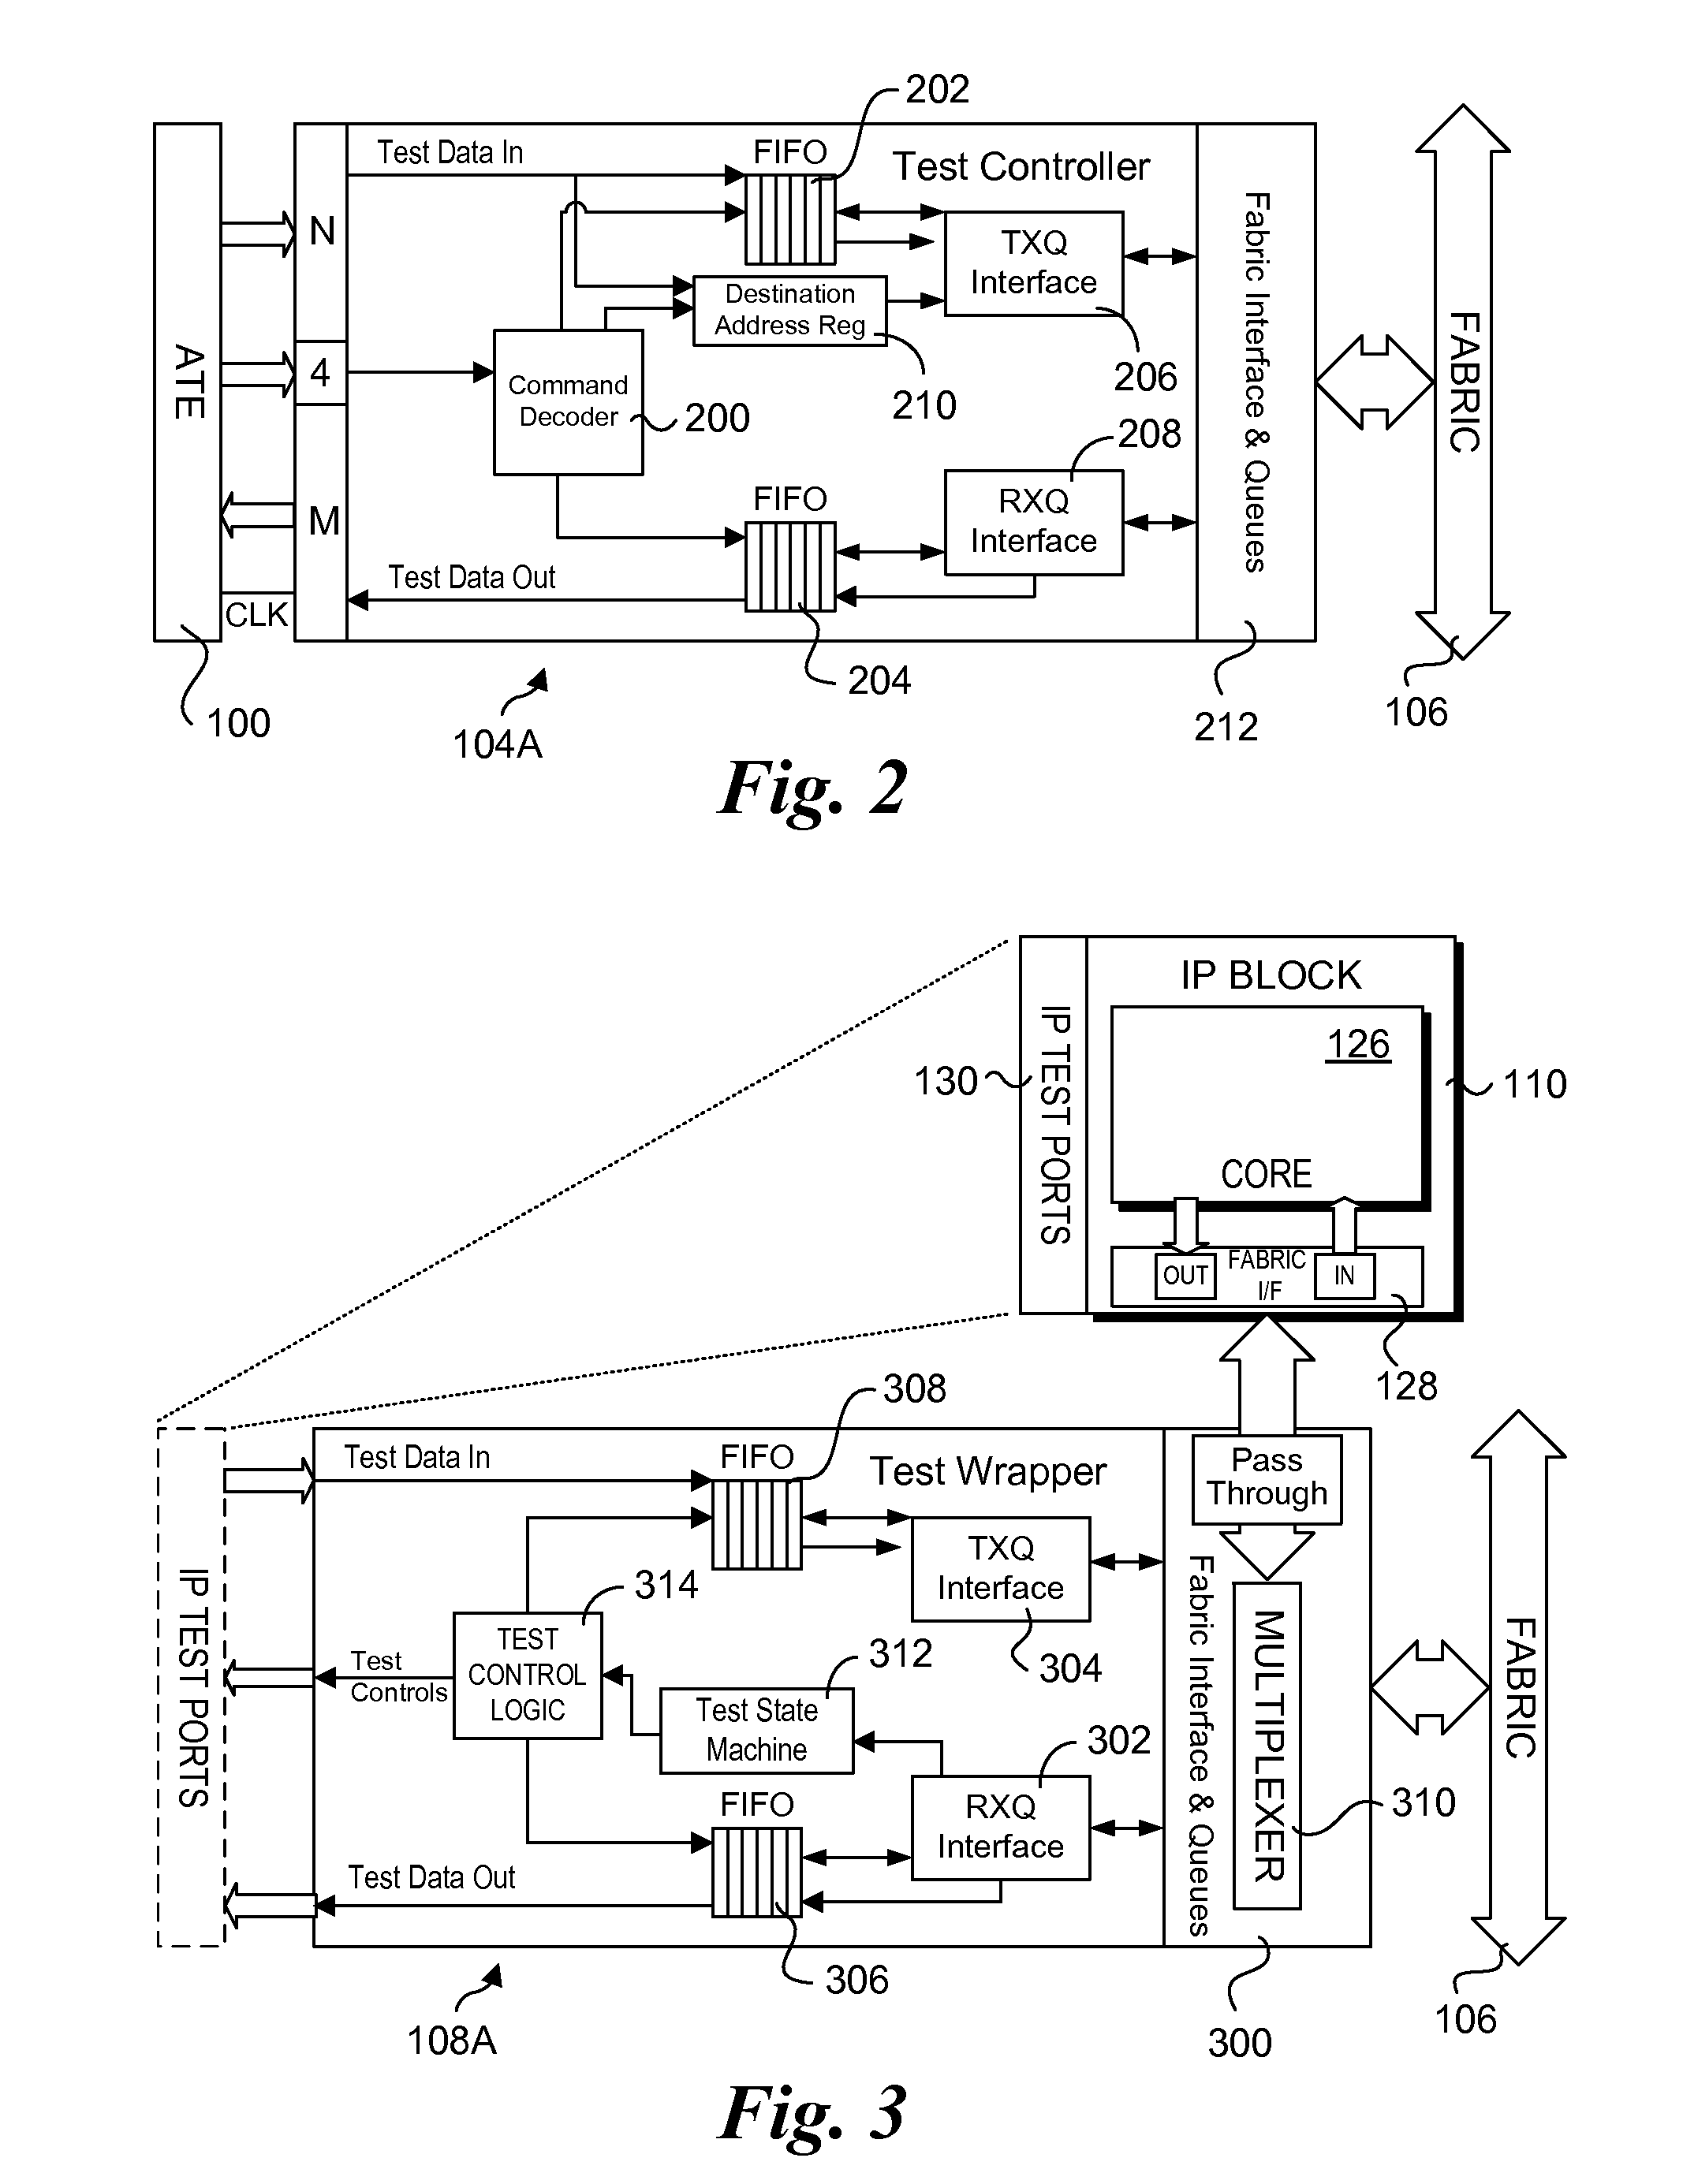 Functional fabric-based test controller for functional and structural test and debug